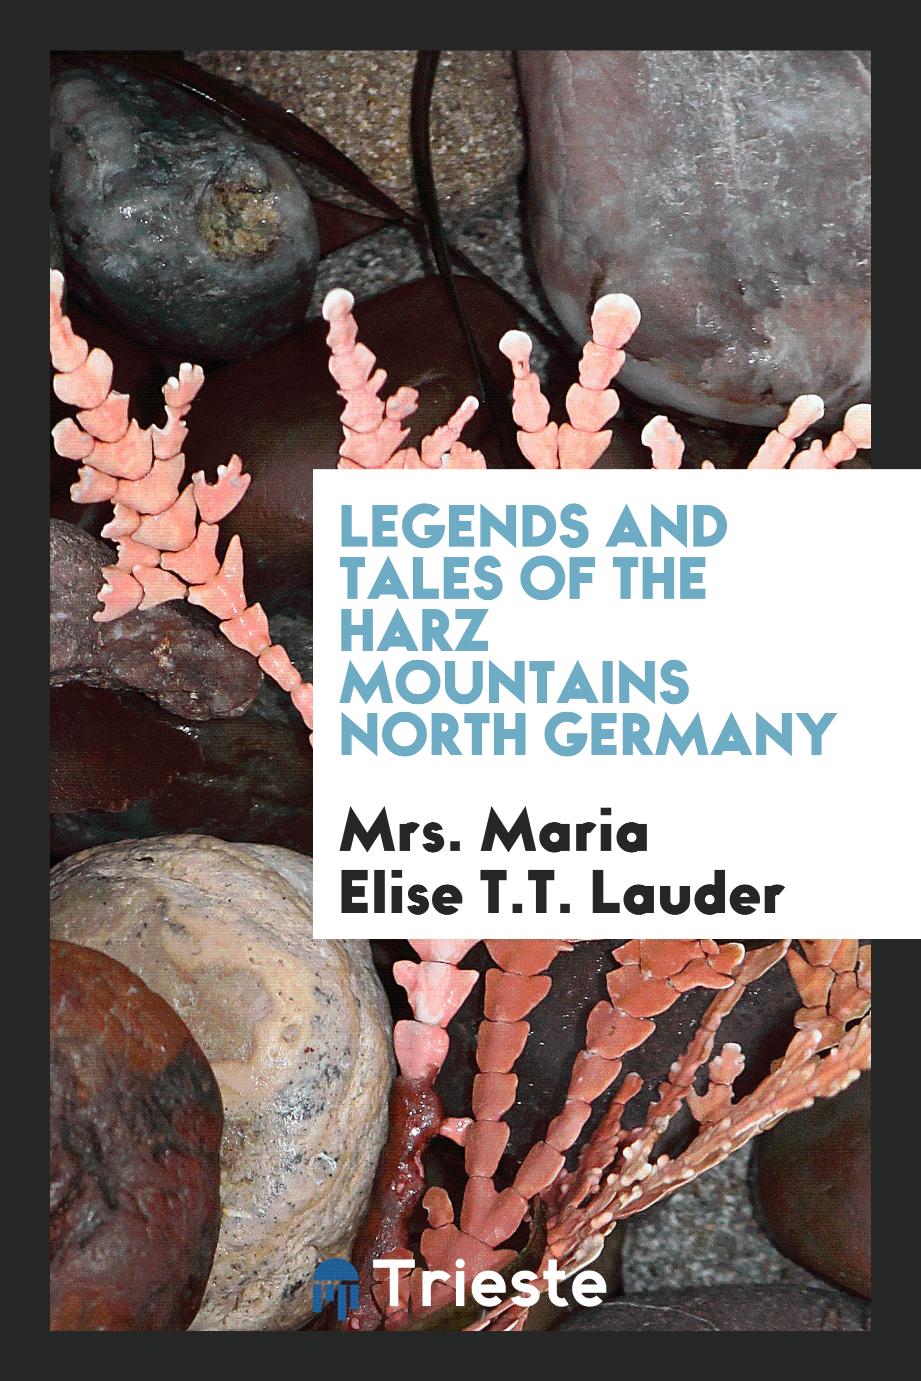 Legends and tales of the Harz Mountains North Germany